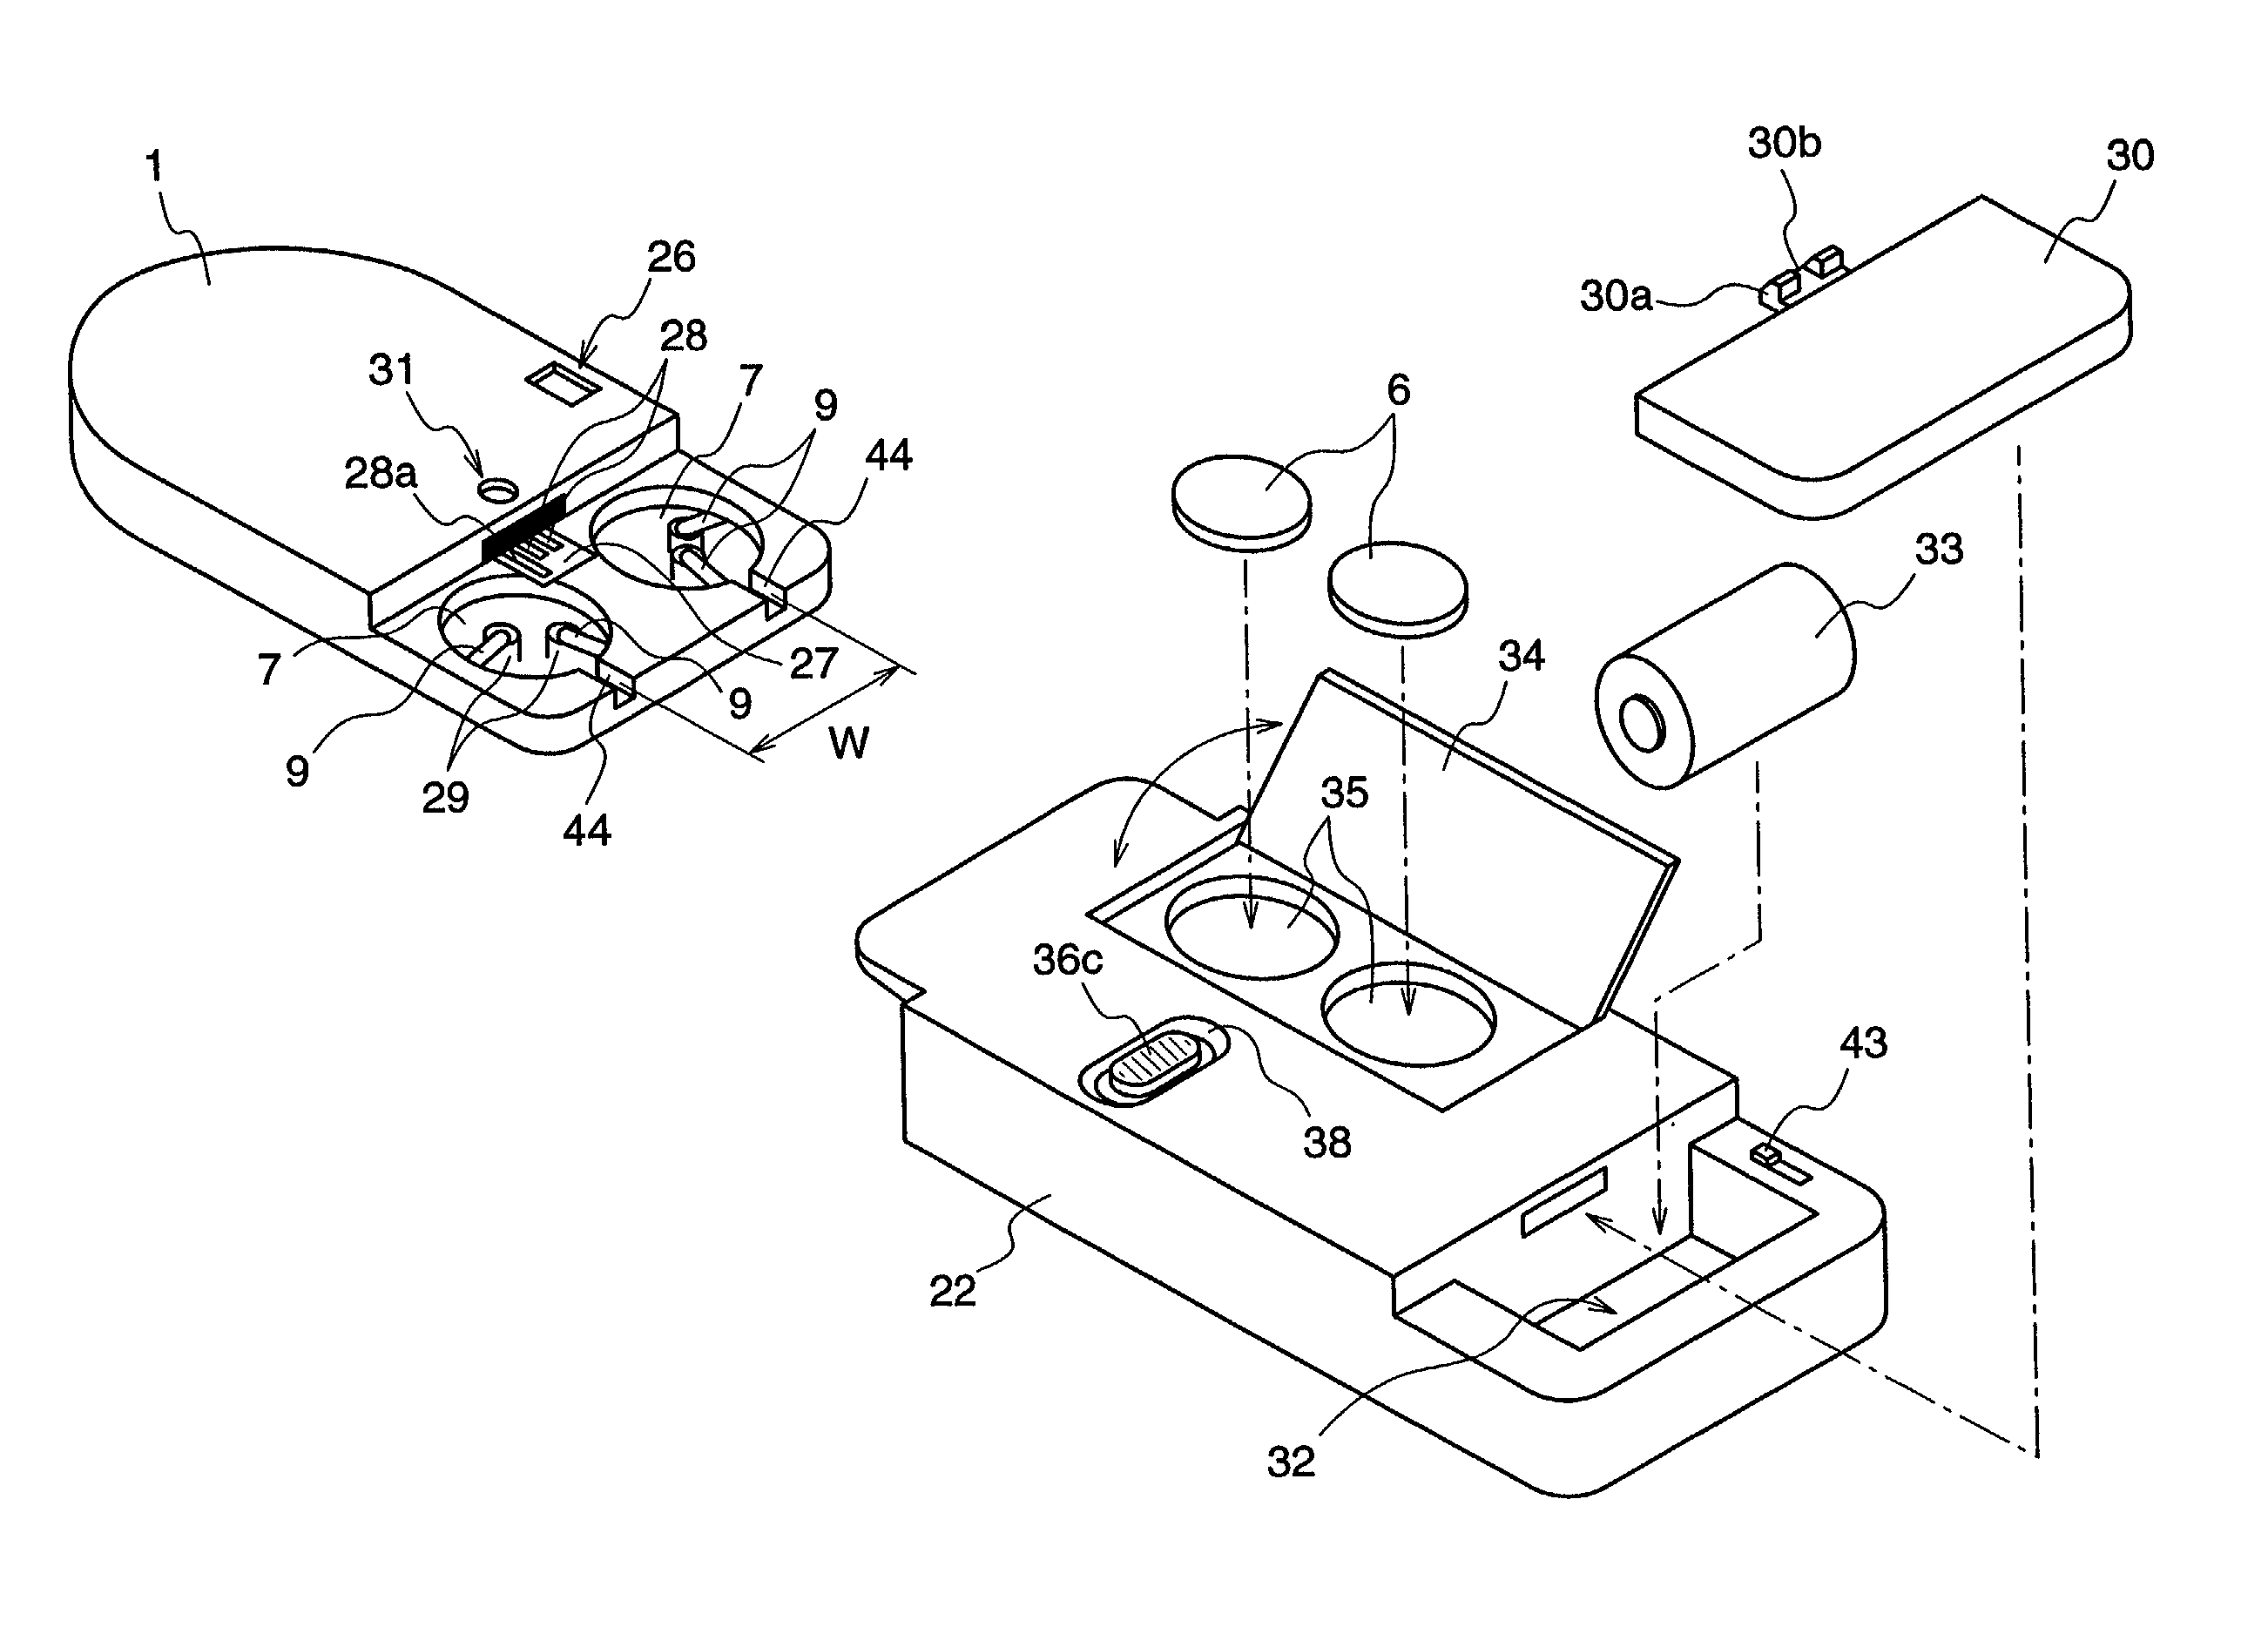 Biometric measuring system with detachable announcement device